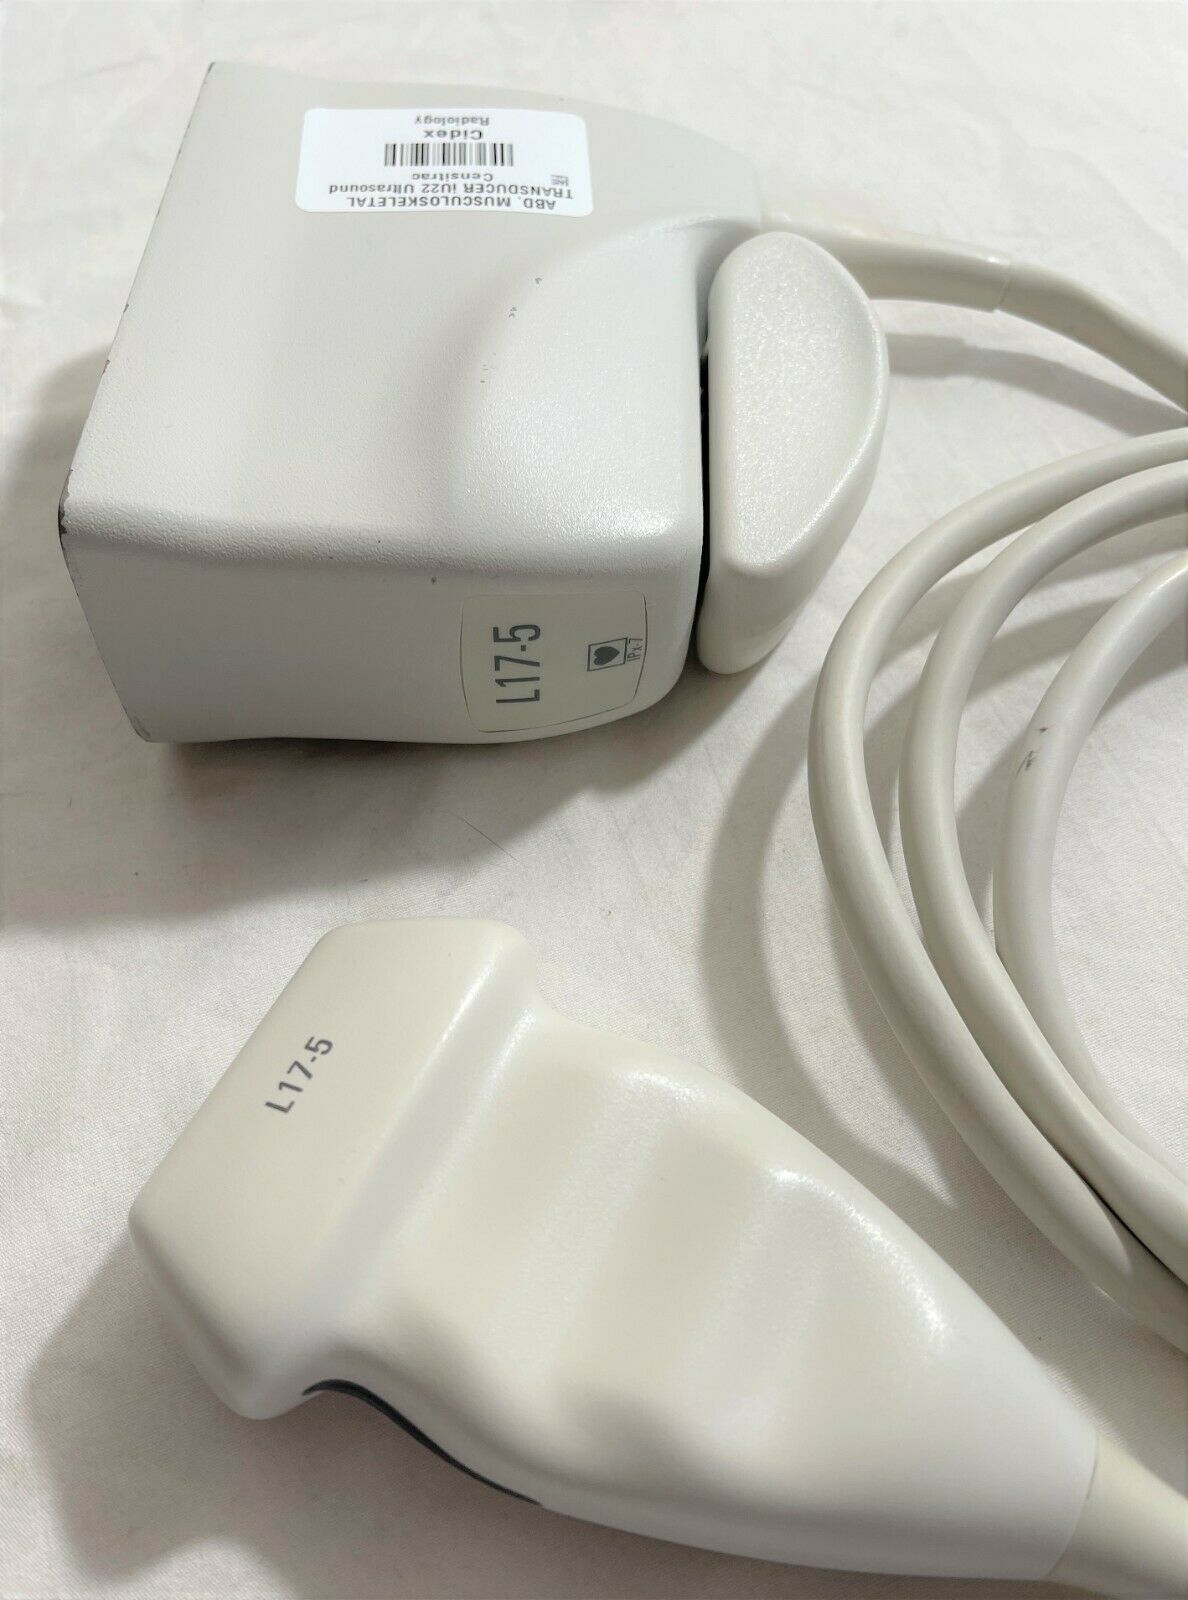 Philips L17-5 Linear Array Ultrasound Probe Transducer DIAGNOSTIC ULTRASOUND MACHINES FOR SALE